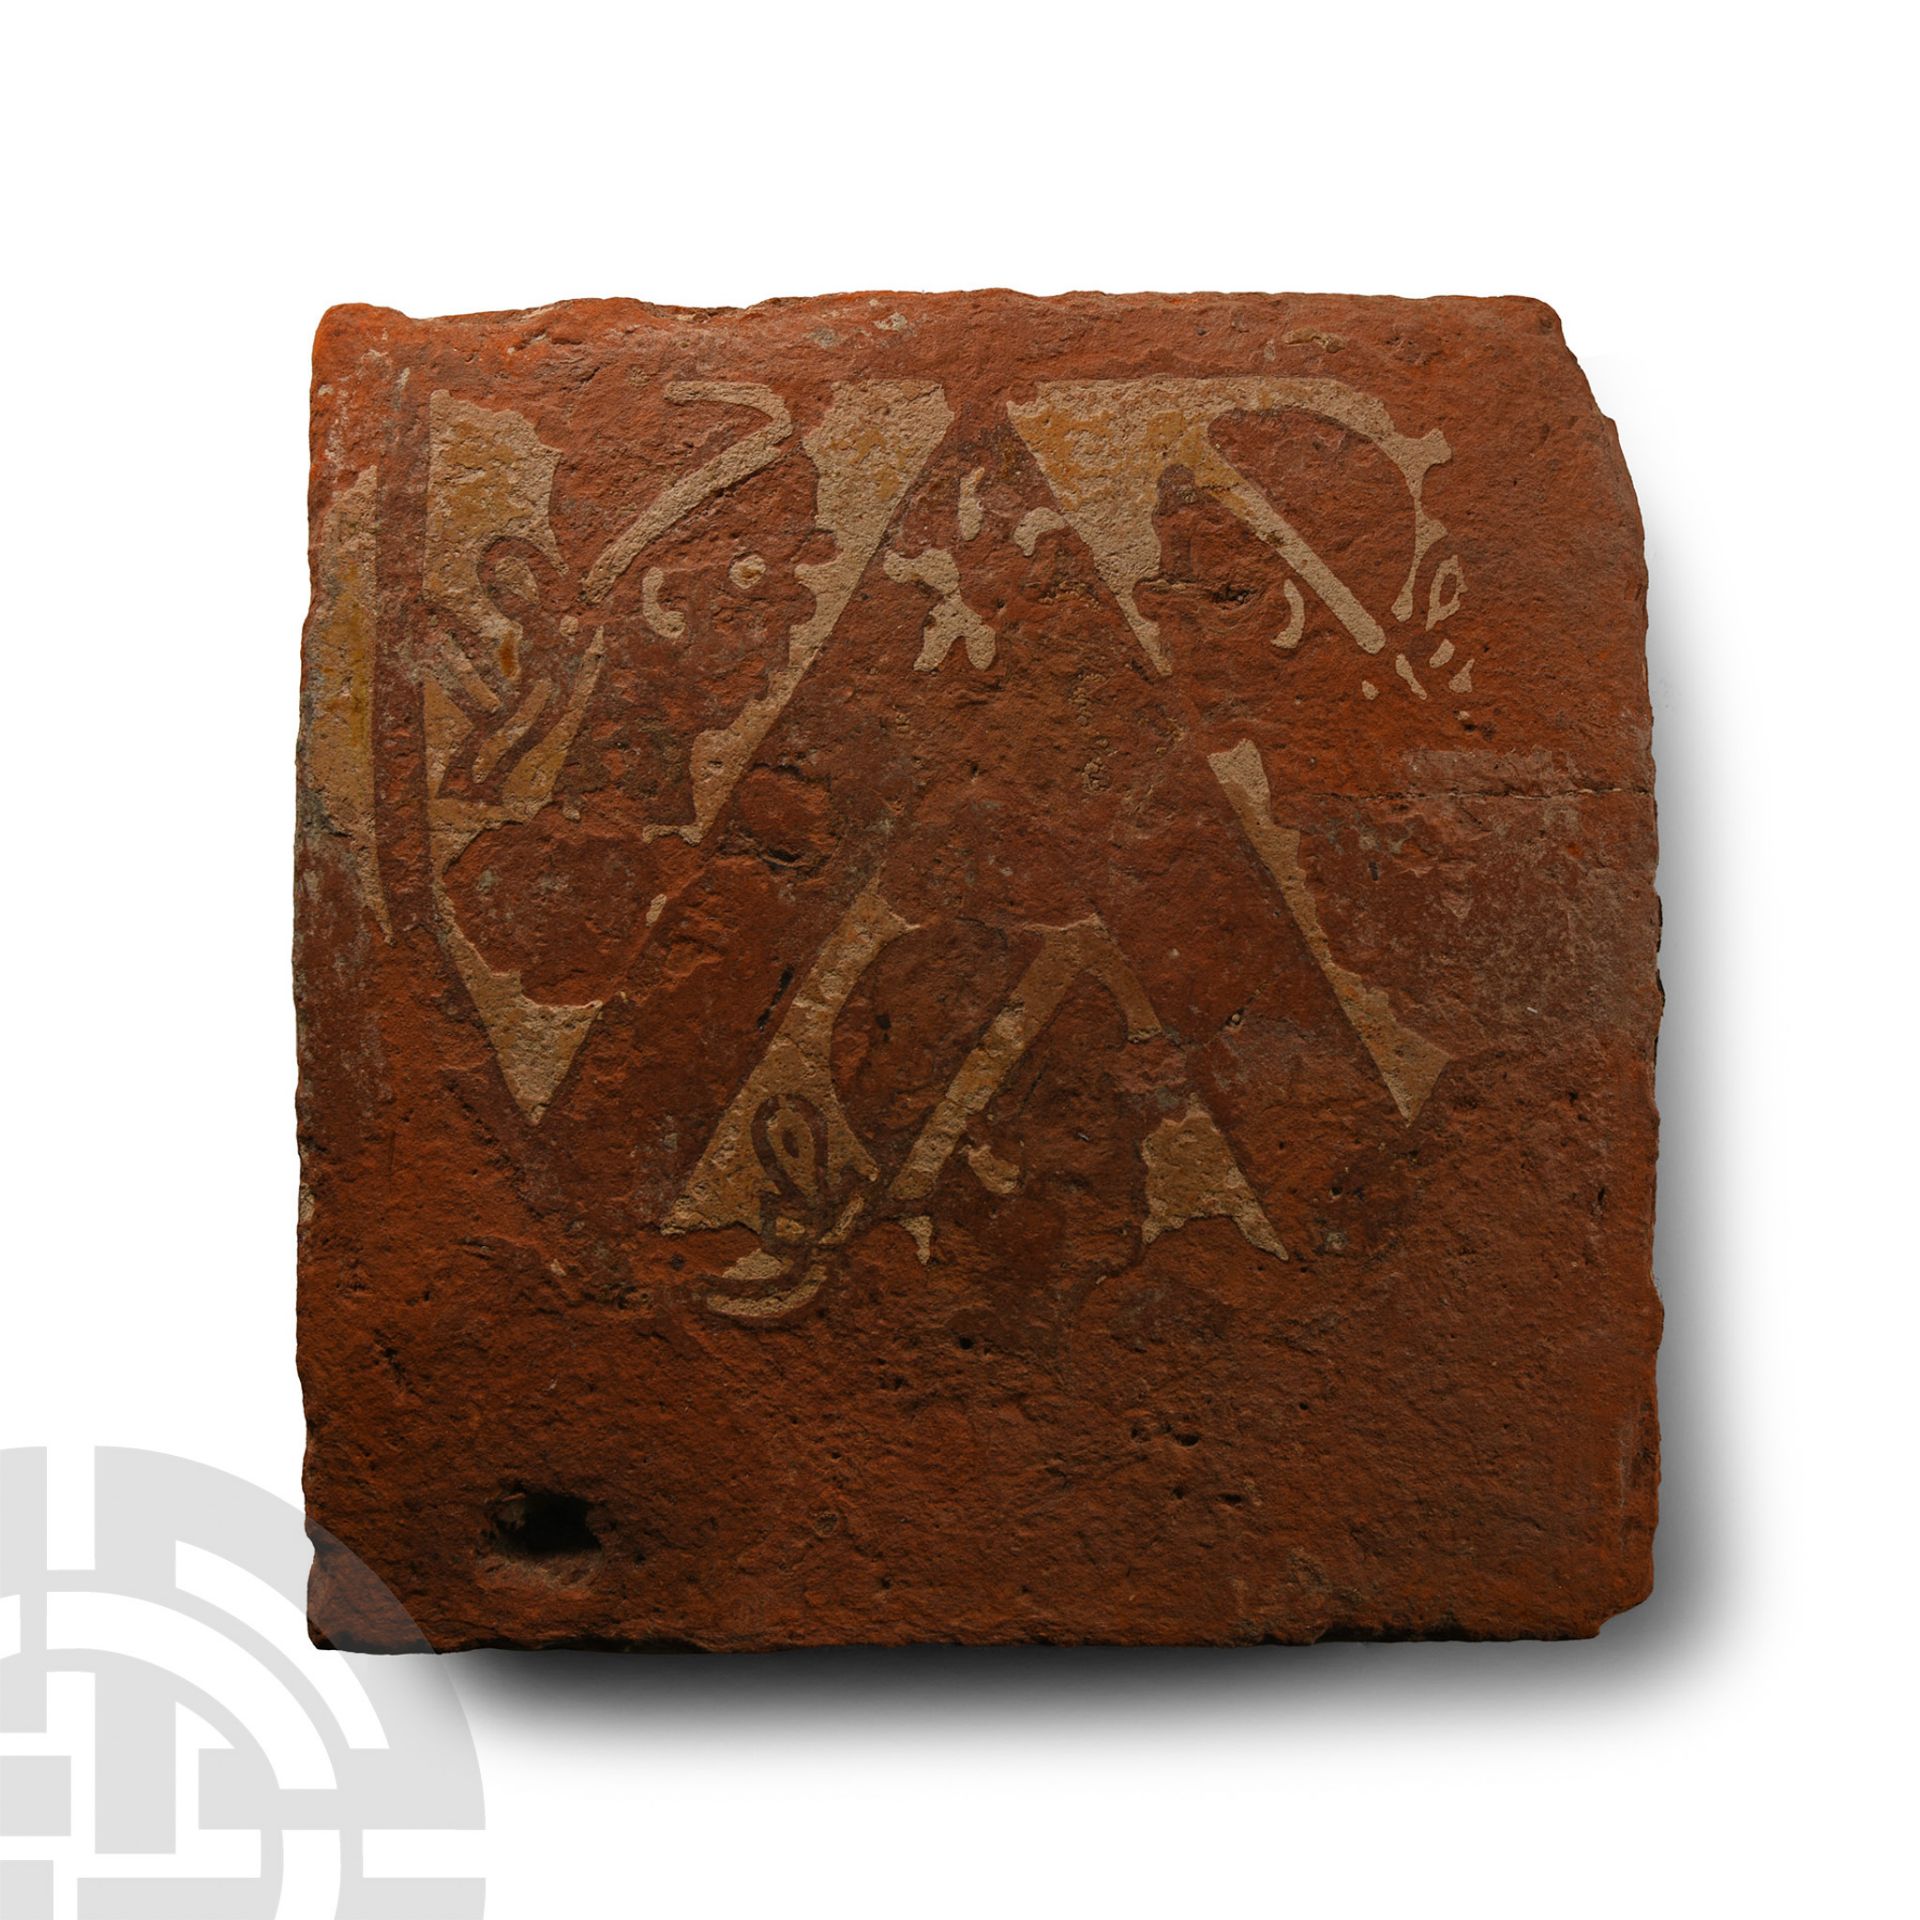 Medieval Heraldic Tile with the Heads of Three Moors within a Shield